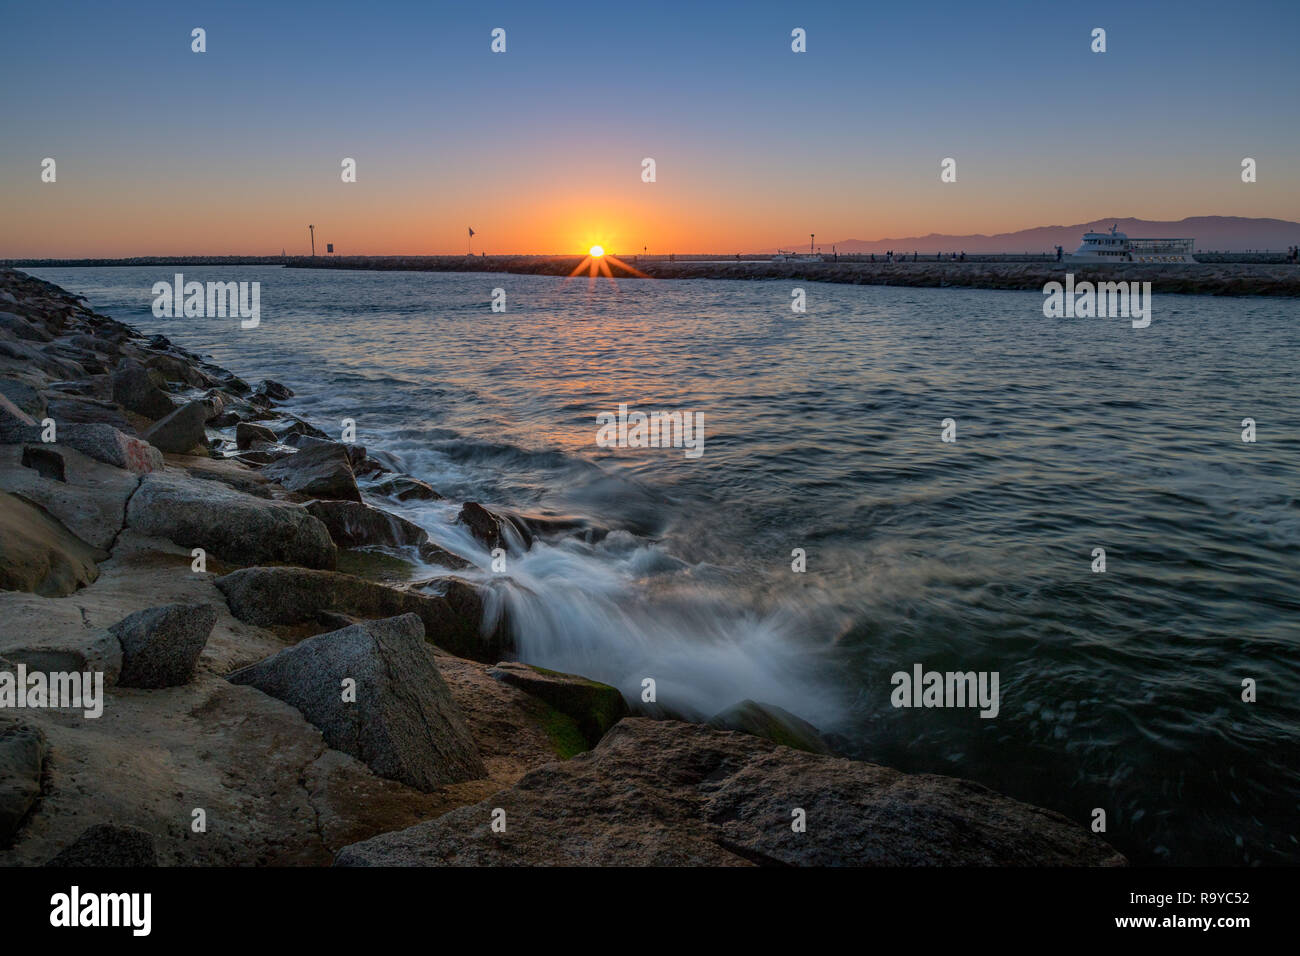 Clear, colorful sky with the sun on the horizon at sunset and waves crashing into a rocky jetty, Marina del Rey, California Stock Photo